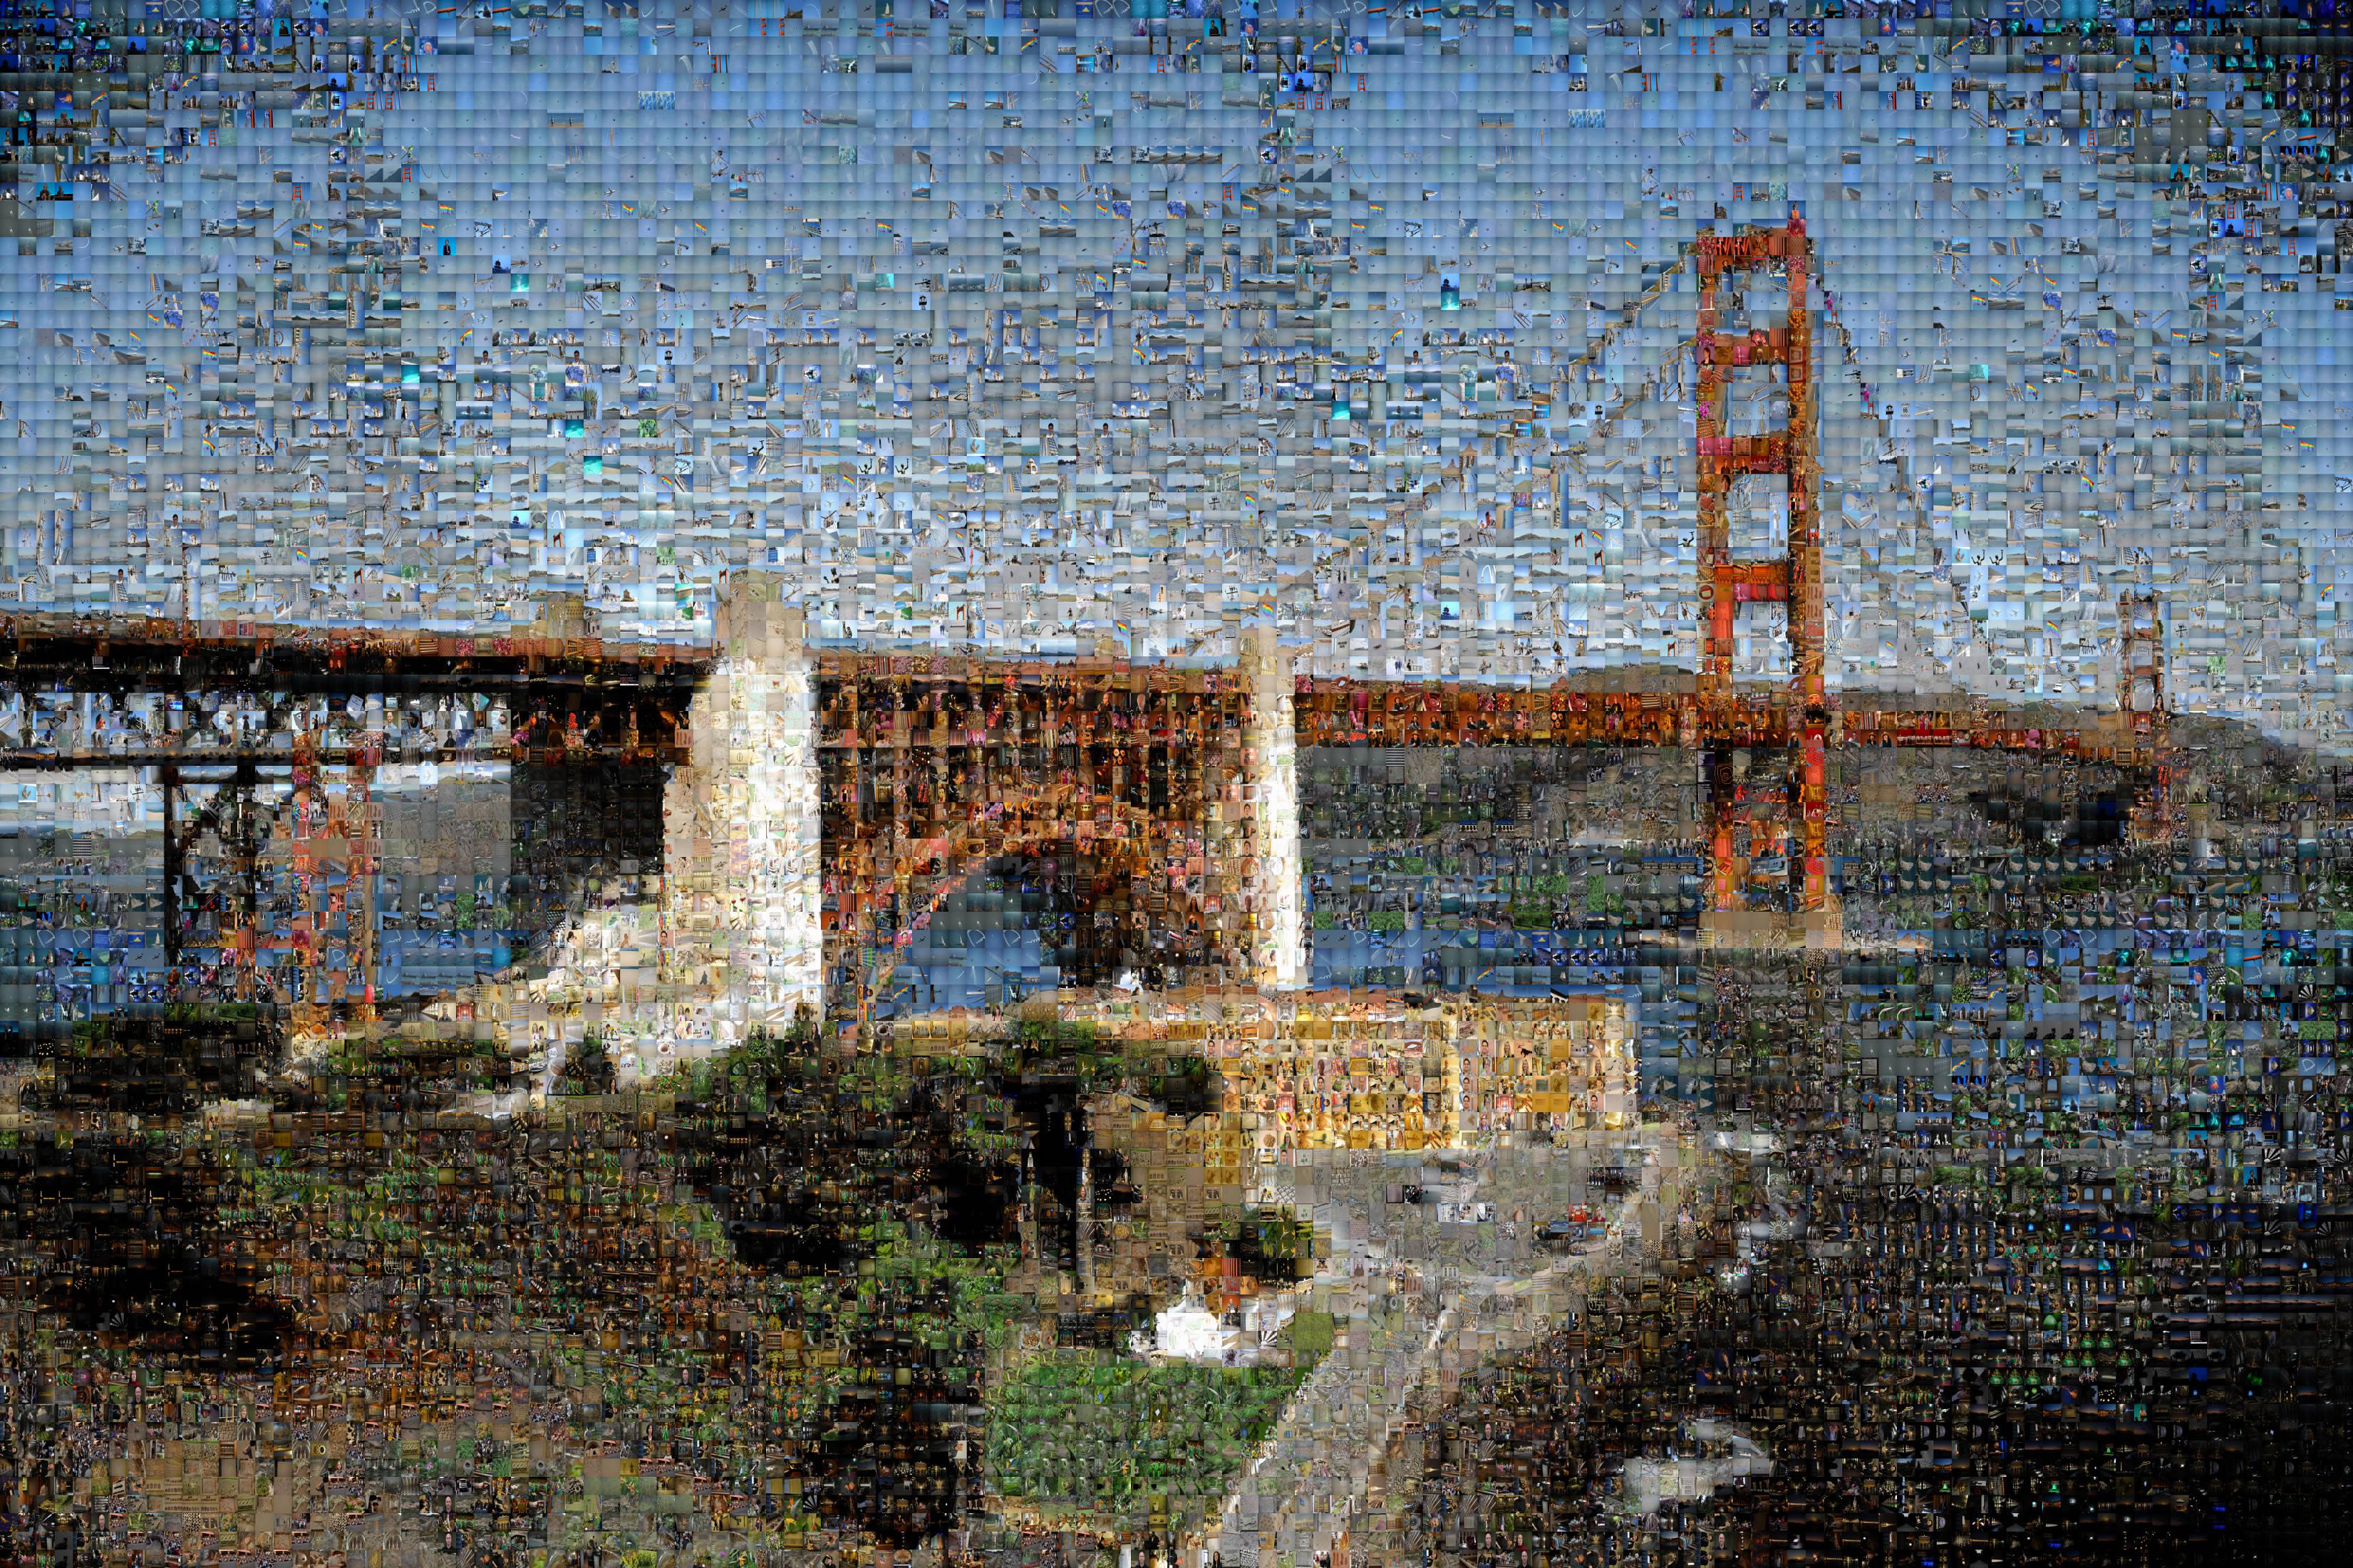 Photographic mosaic depicting the Golden Gate bridge seen from the Presidio in San Francisco